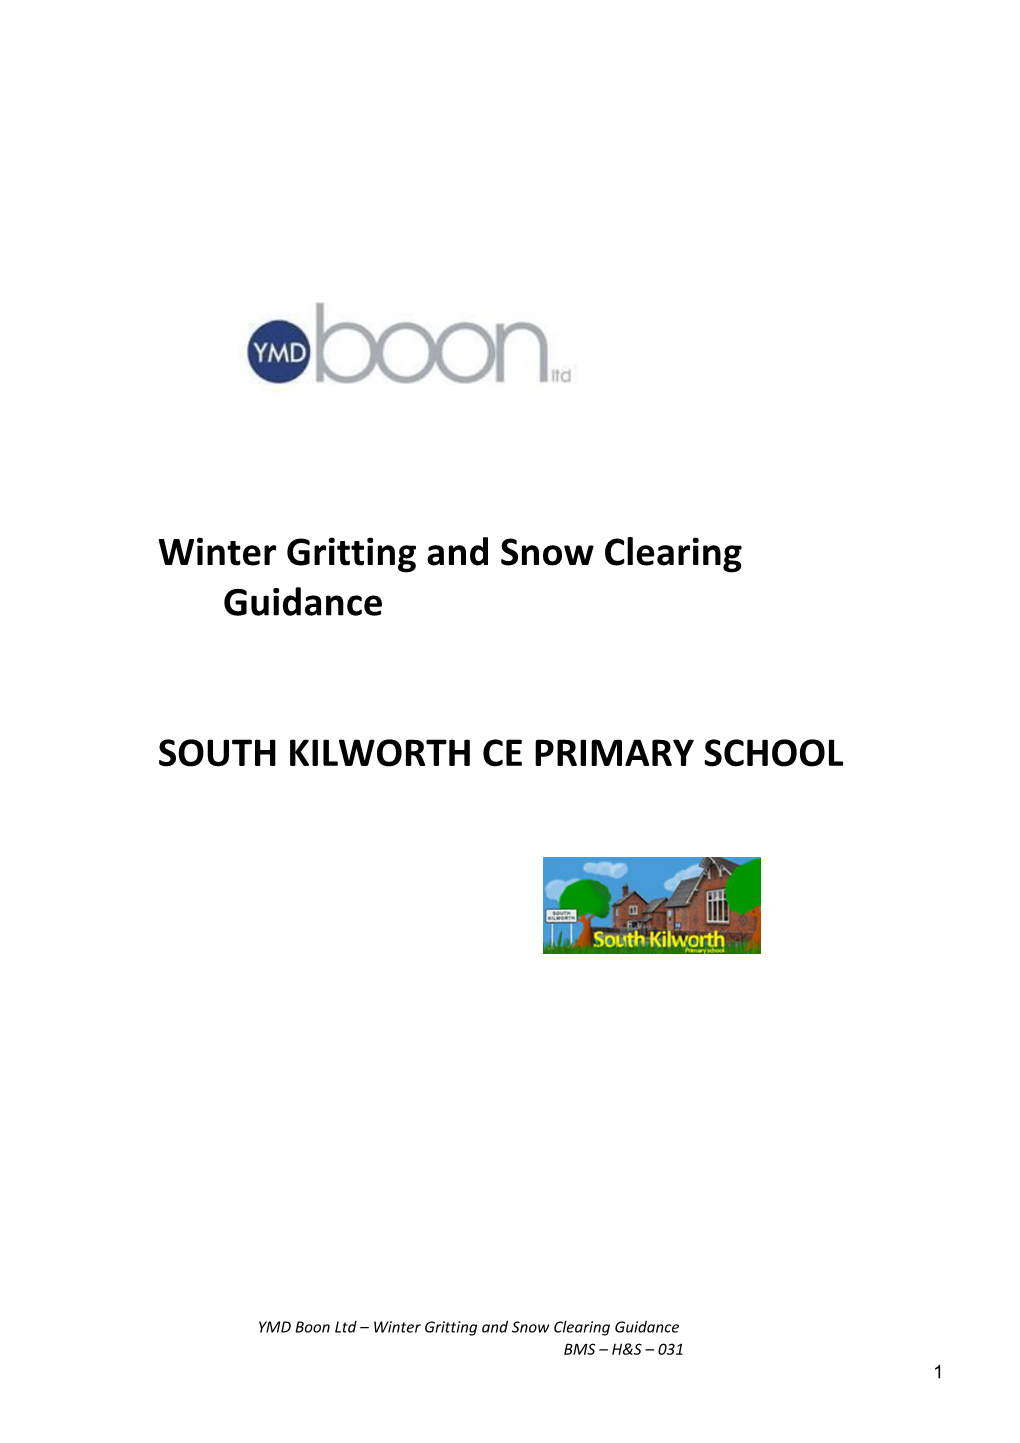 Winter Gritting and Snow Clearing Guidance